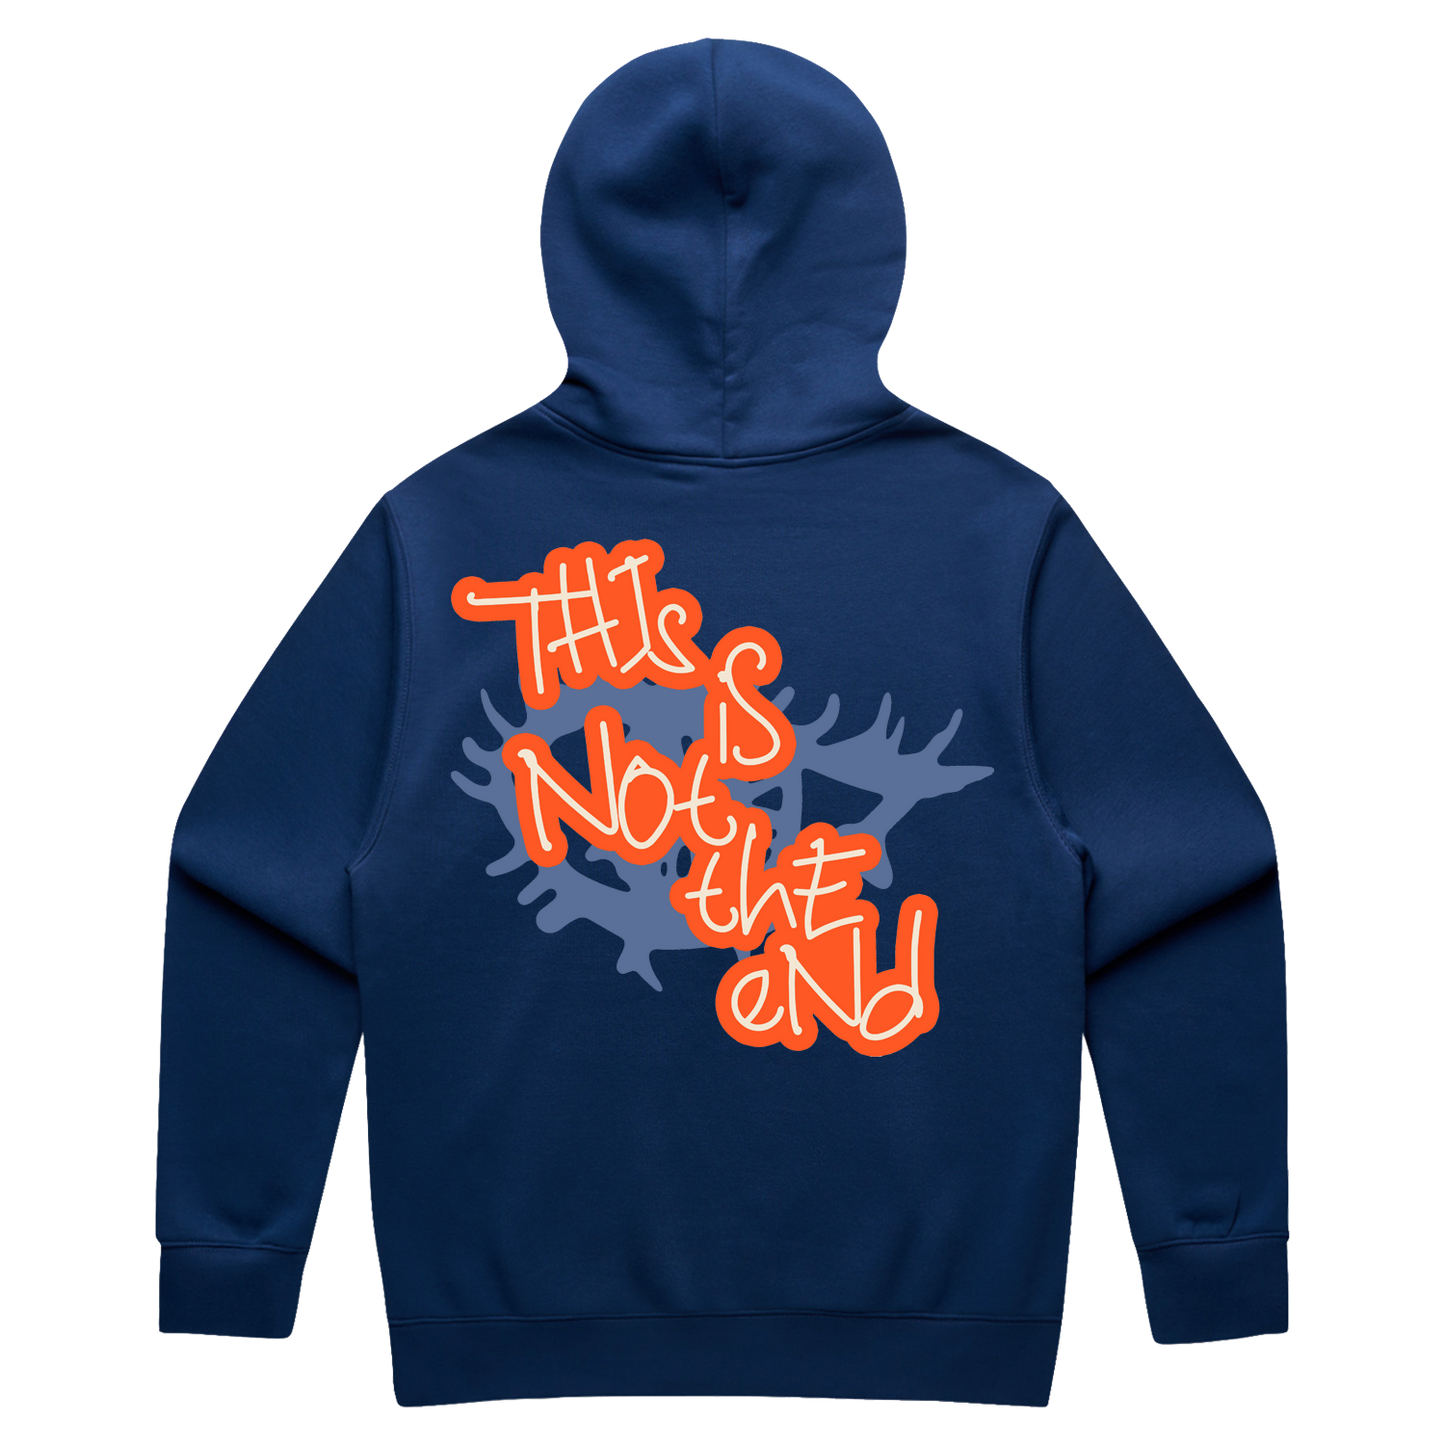 RUEL 'NOT THE END' PUFF HOODIE